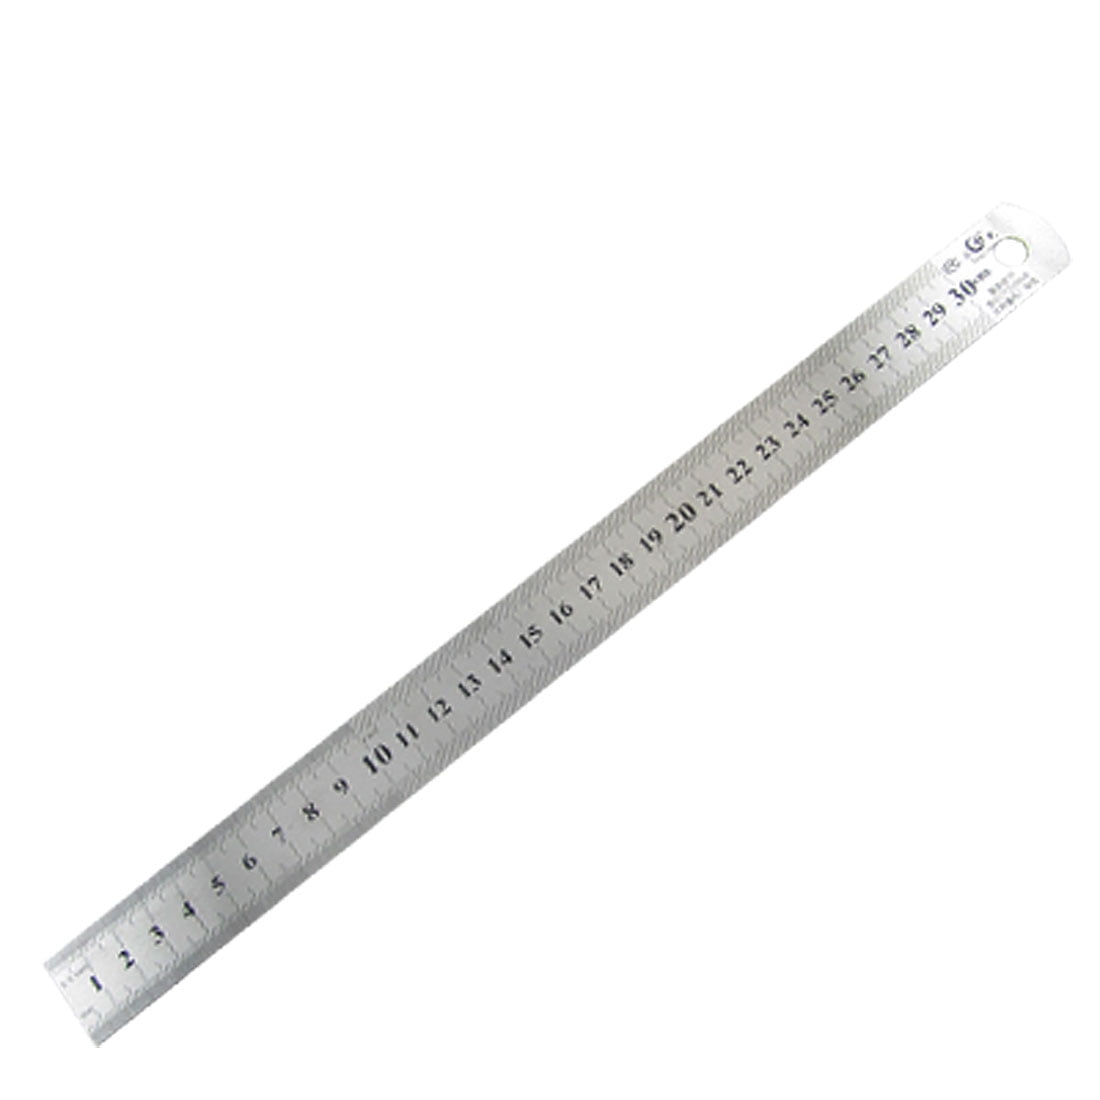 Wow Look 30cm Stainless Steel Ruler Only £2.99 